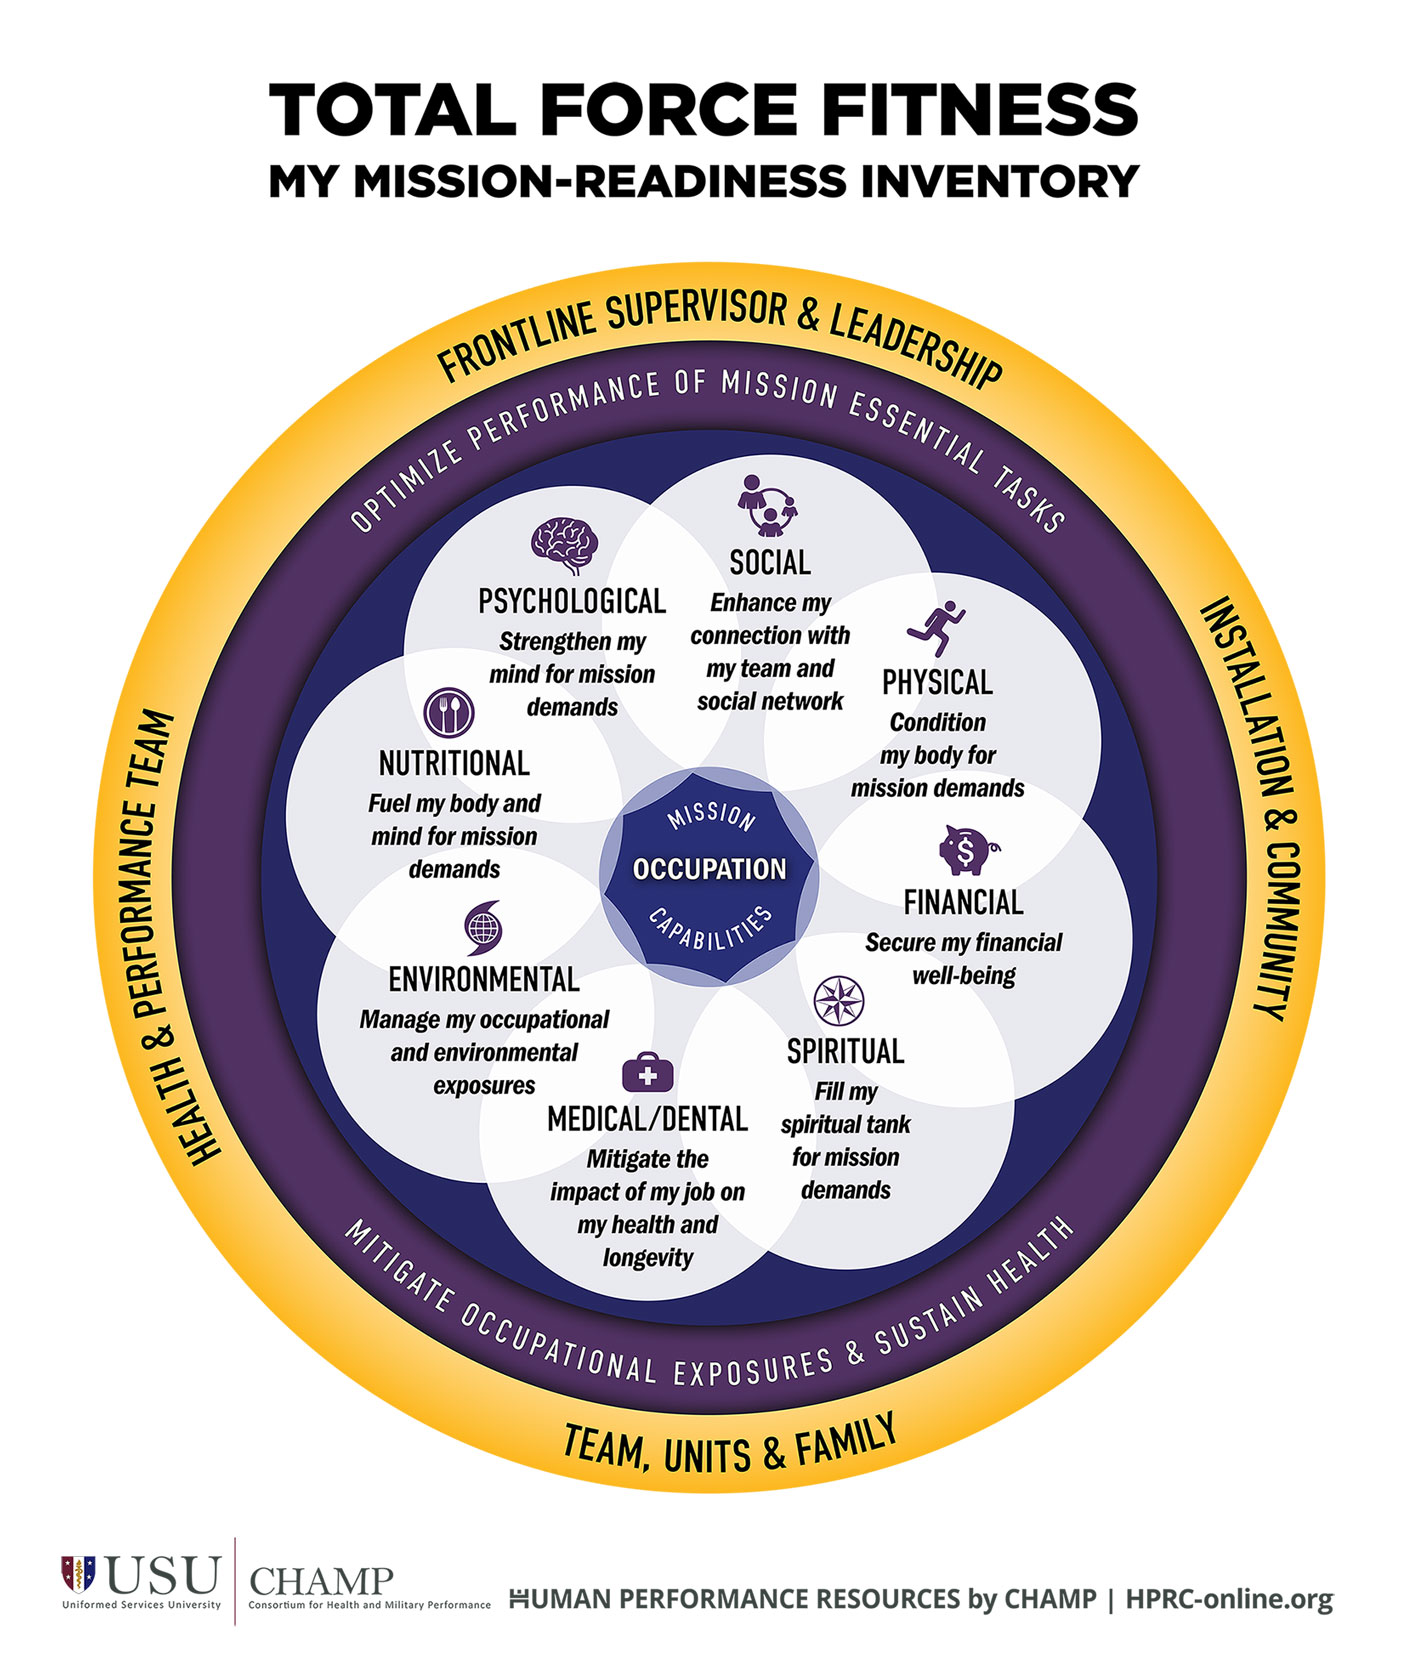 Total Force Fitness. My Mission-Readiness Inventory. Shows relationships between TFF domains